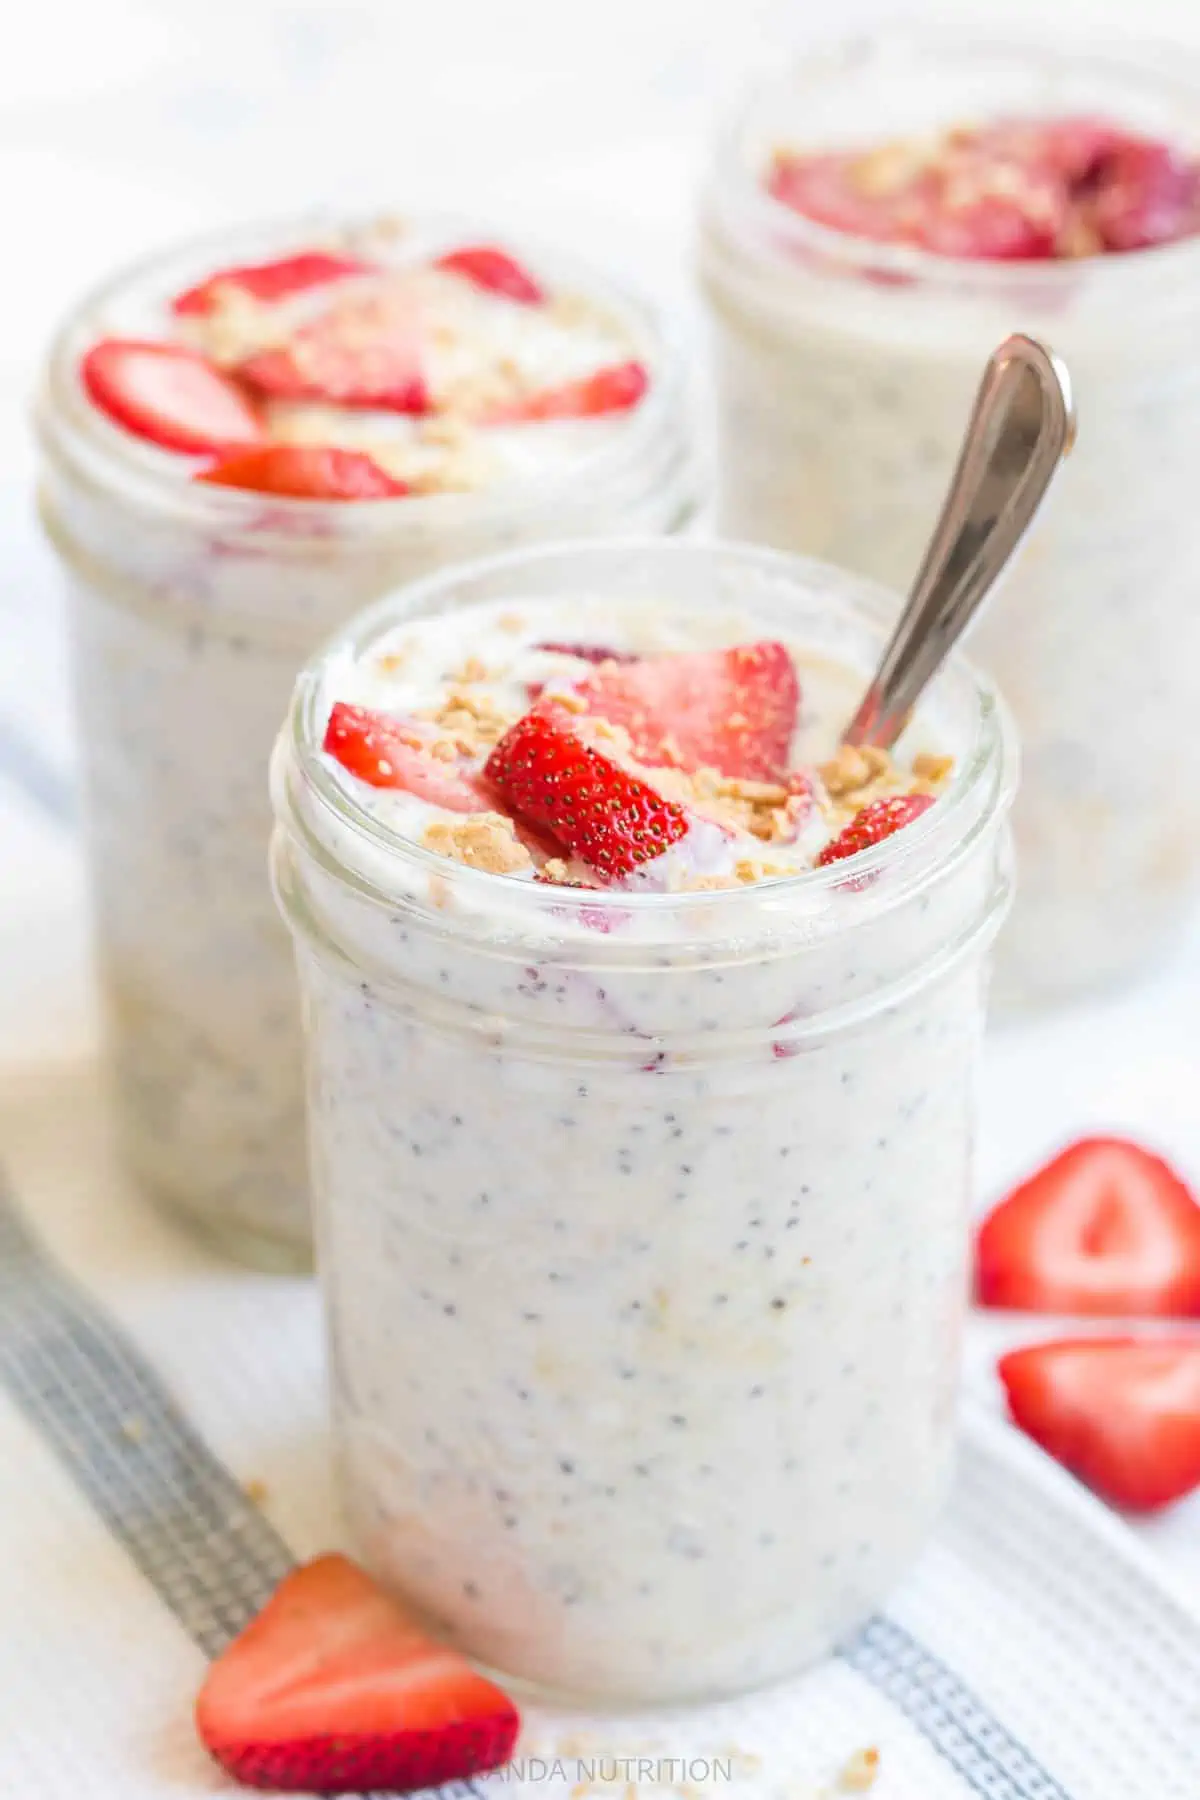 A hearty selection of protein-packed, calorie-dense breakfast options such as oatmeal, eggs, and smoothies, ideal for boosting muscle growth and energy levels.